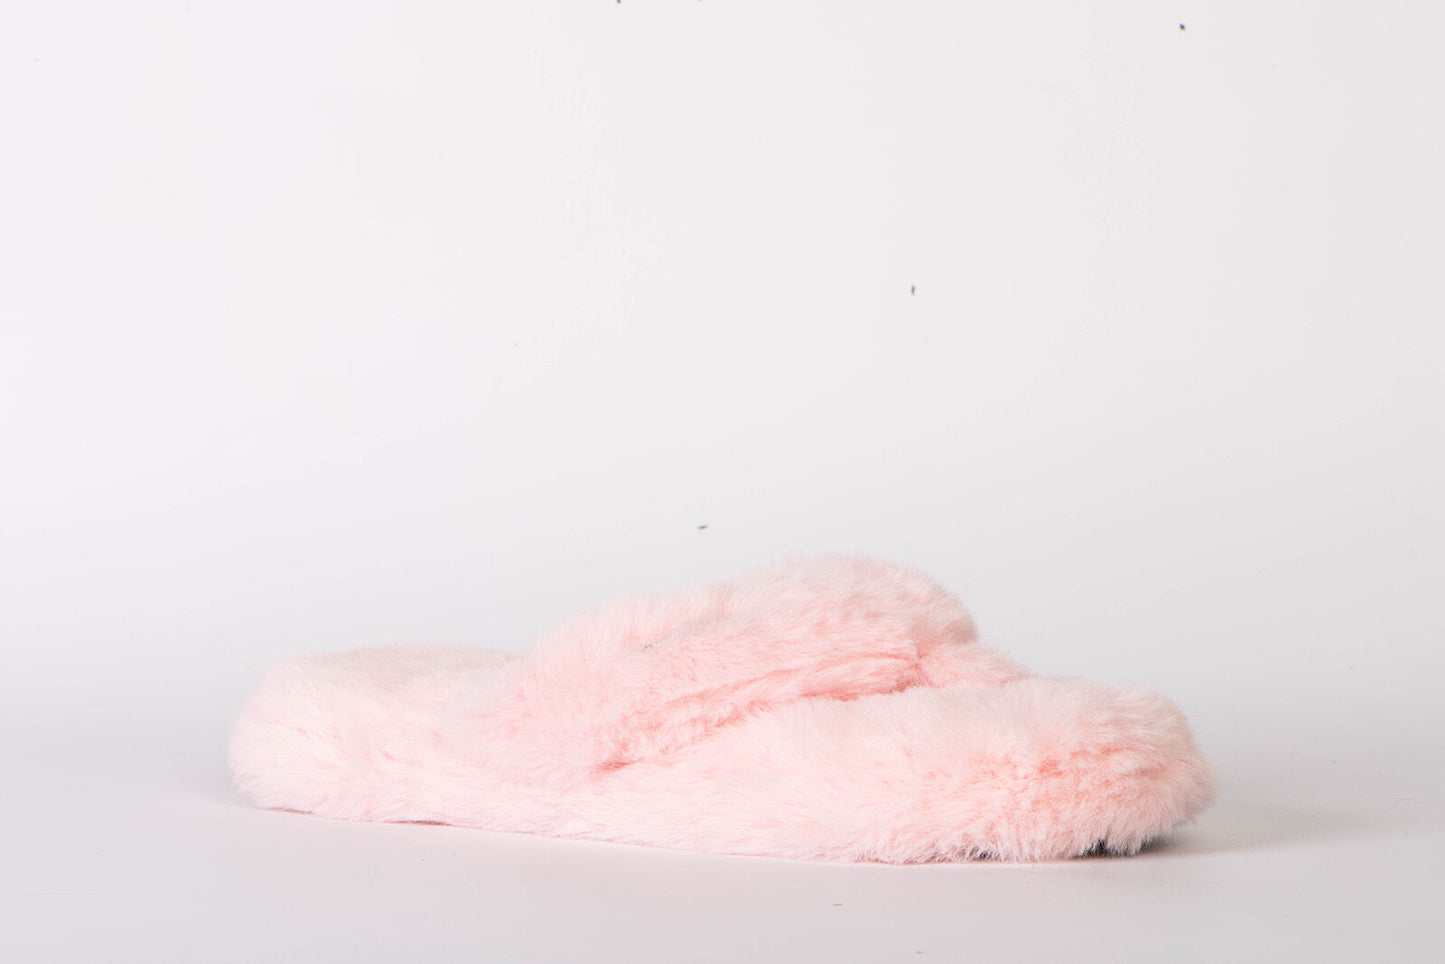 Blush Pink | Recycled Cottontail Flip Flop Slippers